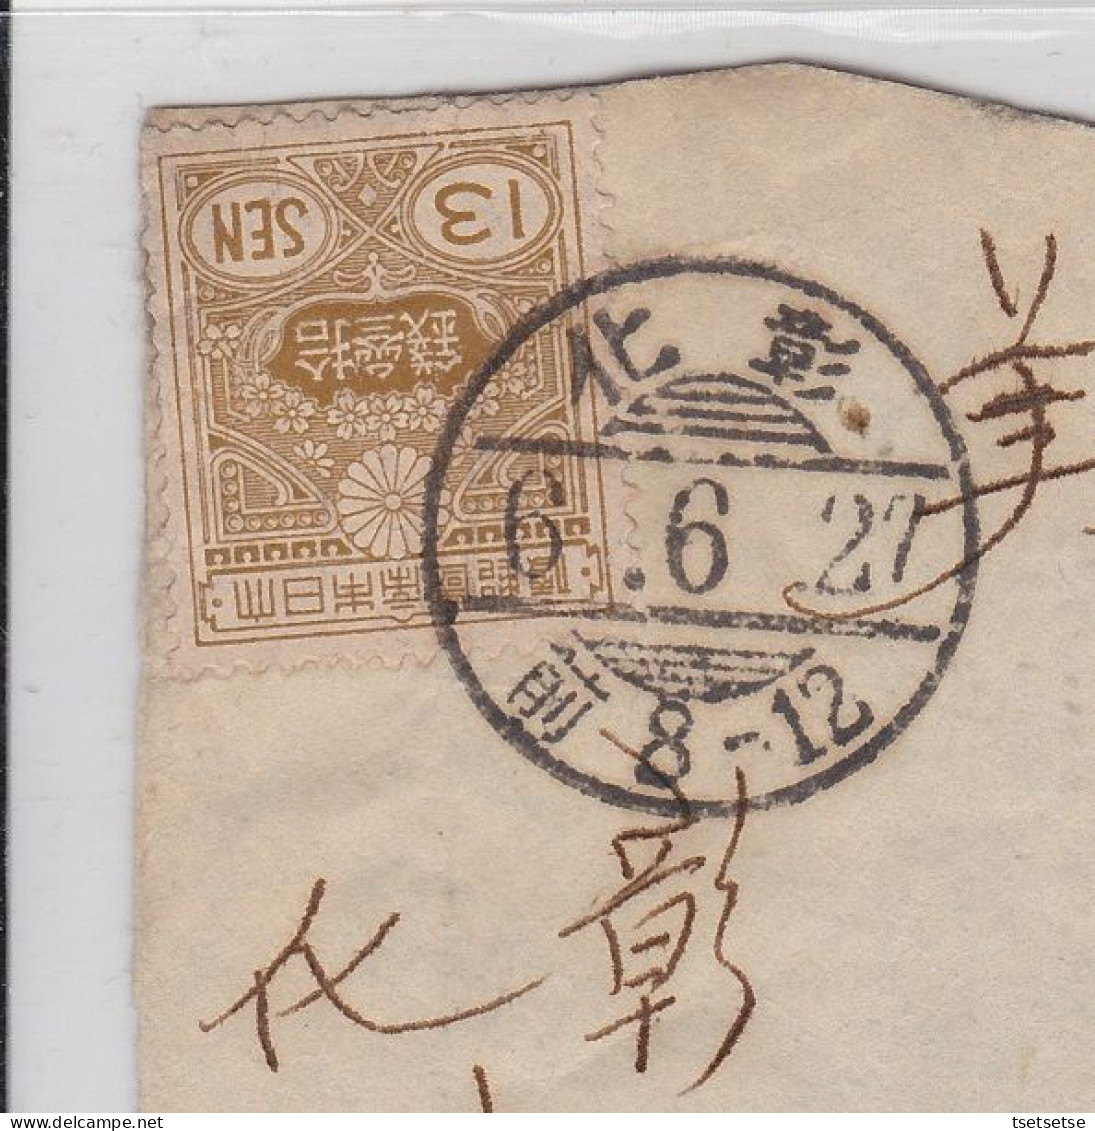 1917 Japan Occupy Taiwan Registered Letter, From Changhua ToTaipei, Bearing 13 Sen Imperial Japan Stamp - 1945 Japanese Occupation